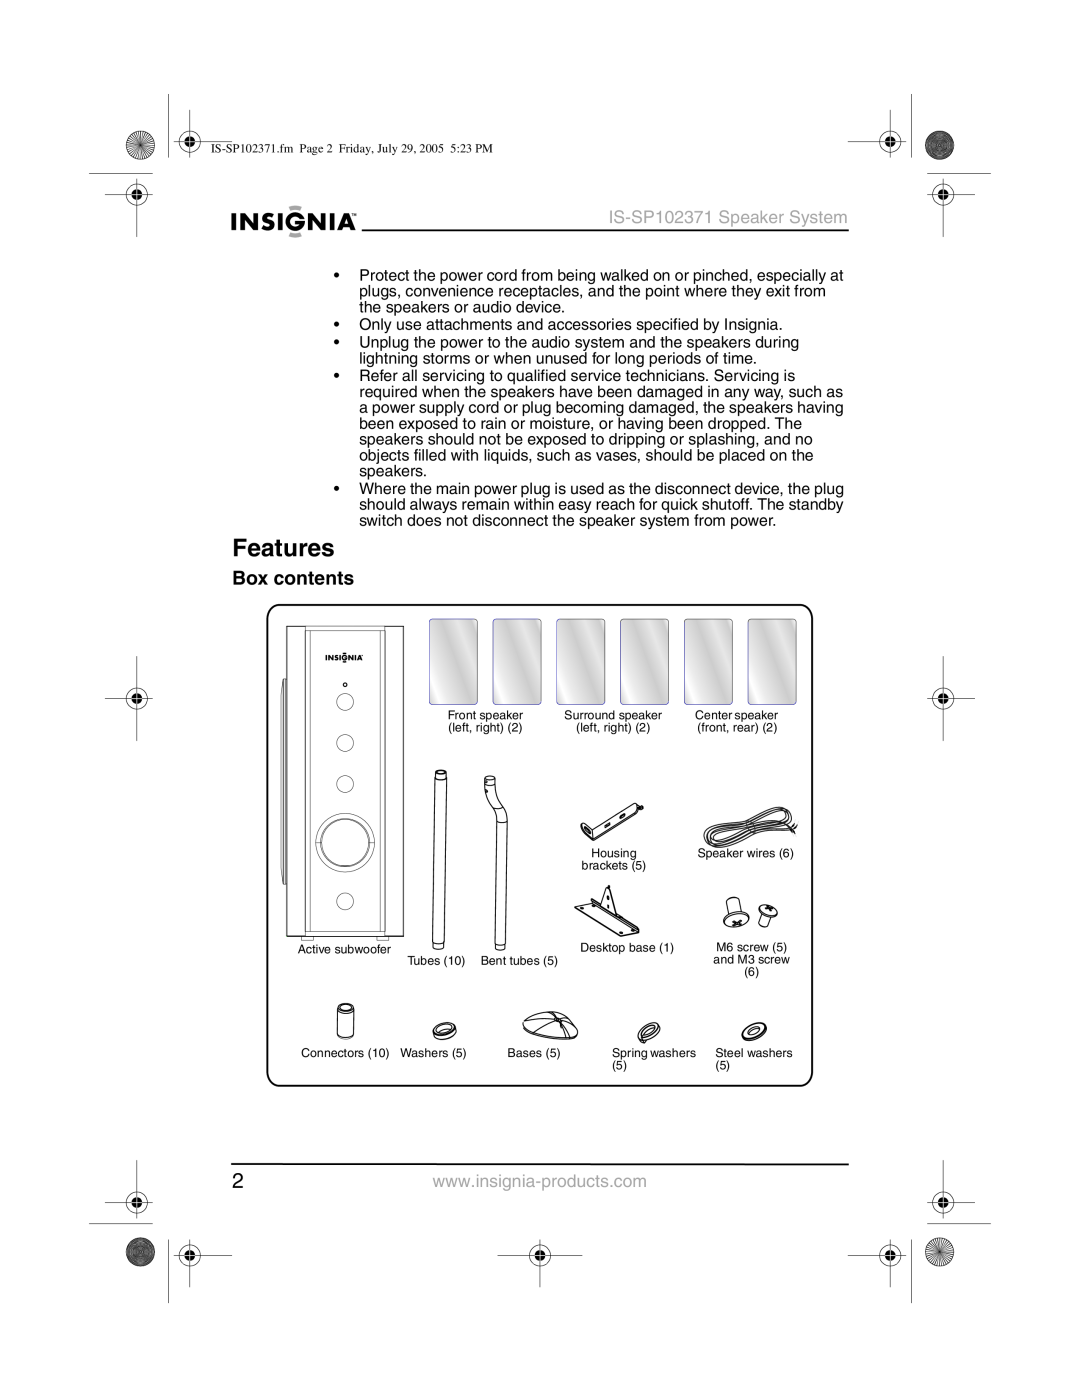 Insignia manual Features, Box contents, IS-SP102371Speaker System 